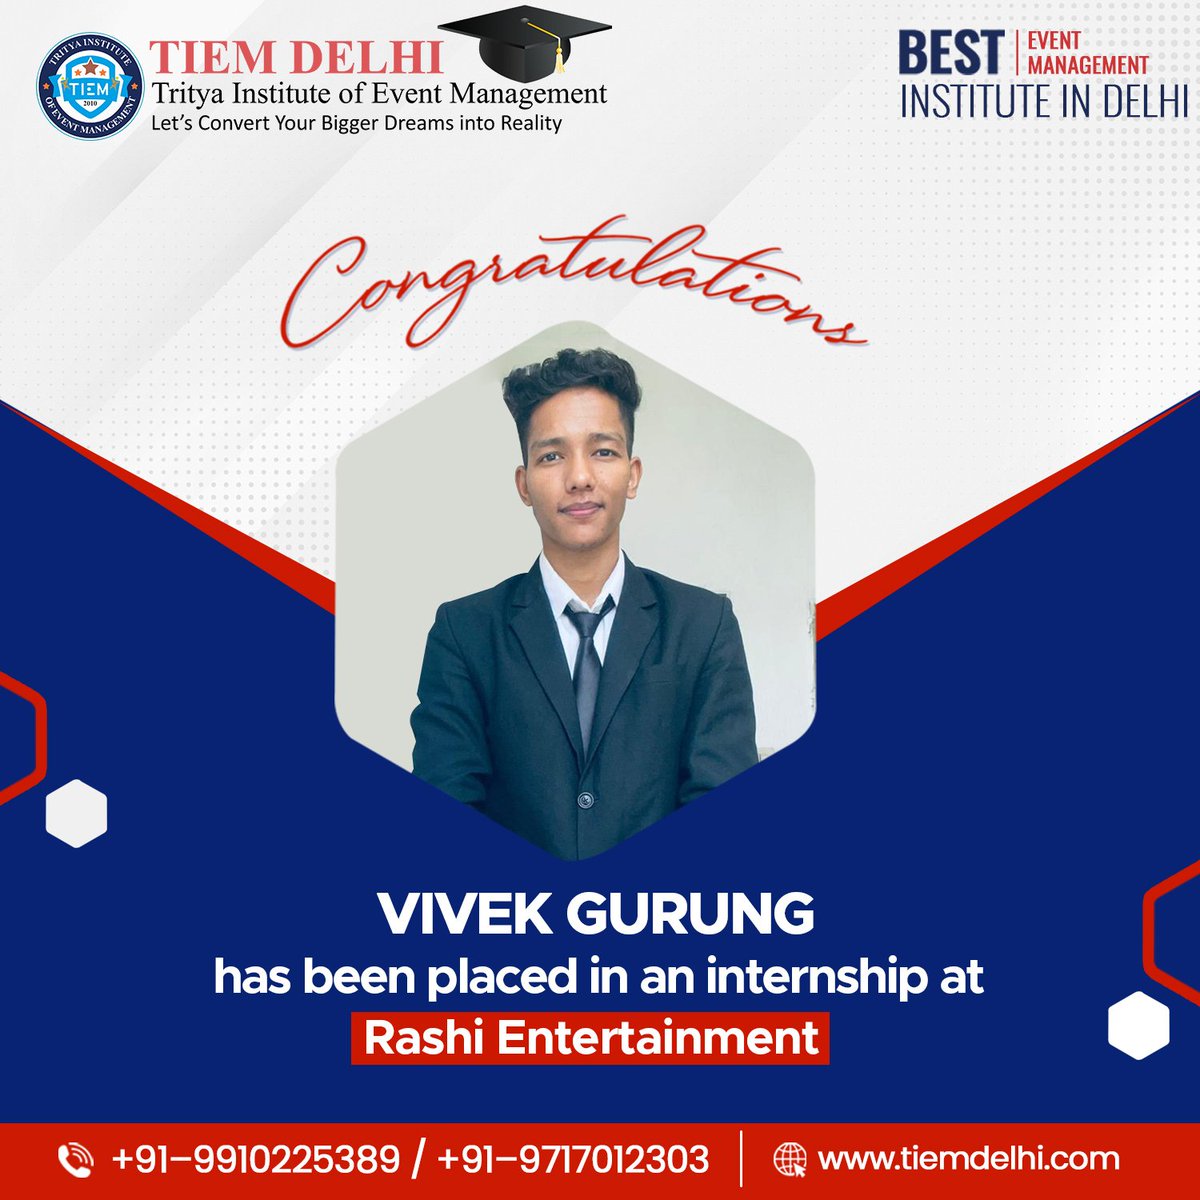 🎉 Exciting News! 🎉
Congratulations to TIEM Student Vivek Gurung for securing an internship at Rashi Entertainment! 🌟 Your hard work and dedication have paid off, Vivek. 🚀
.
.
#InternshipOpportunity #RashiEntertainment #FutureLeaders #Education